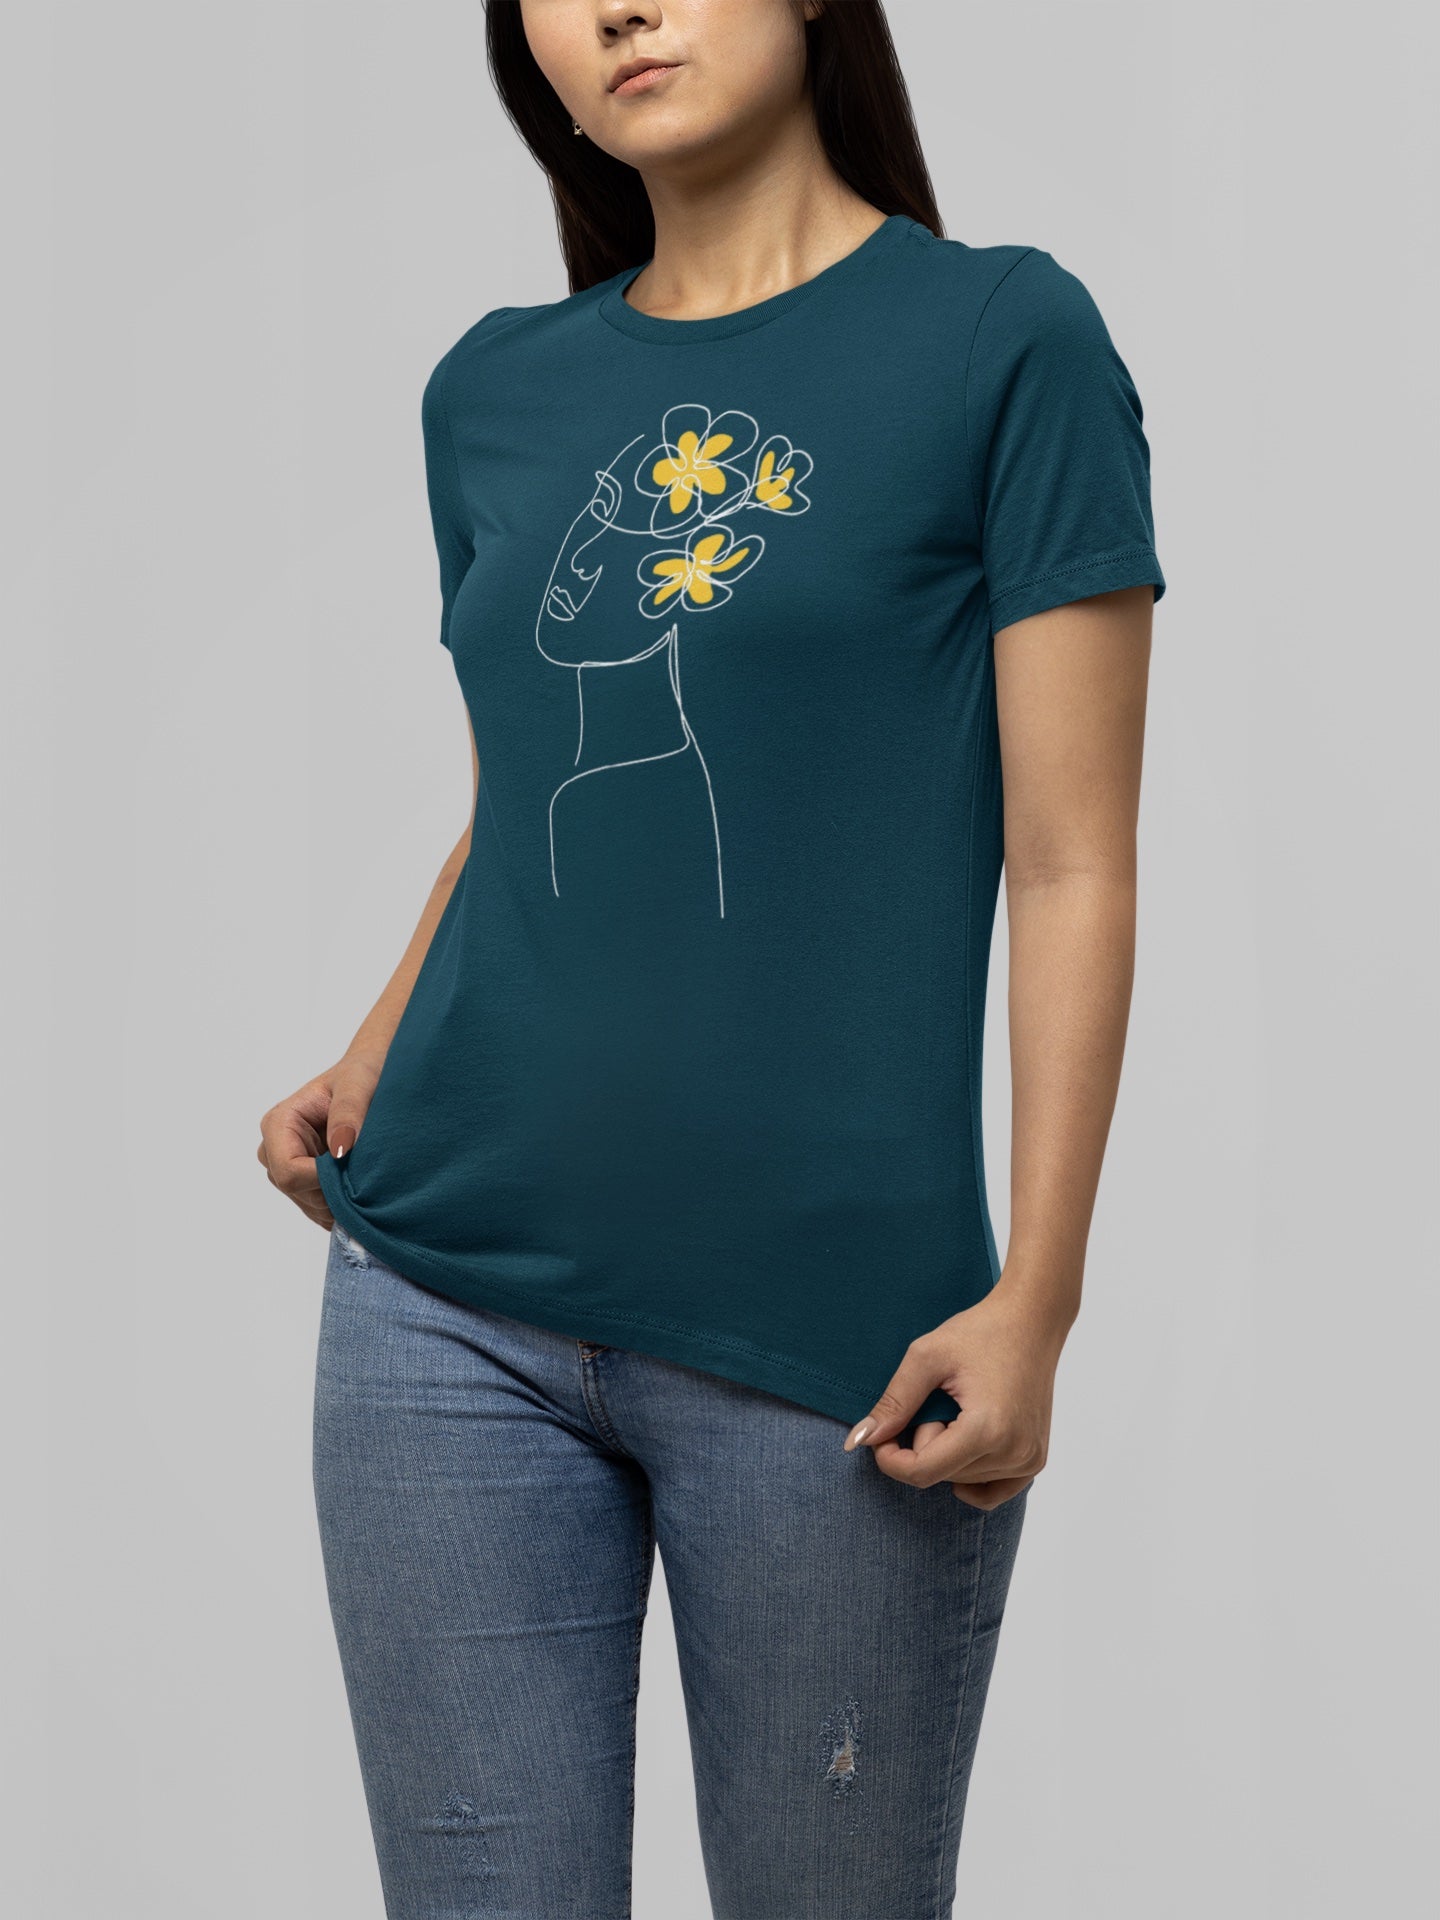 FACE FLORAL PRINTED TSHIRT -PRUSSIAN BLUE